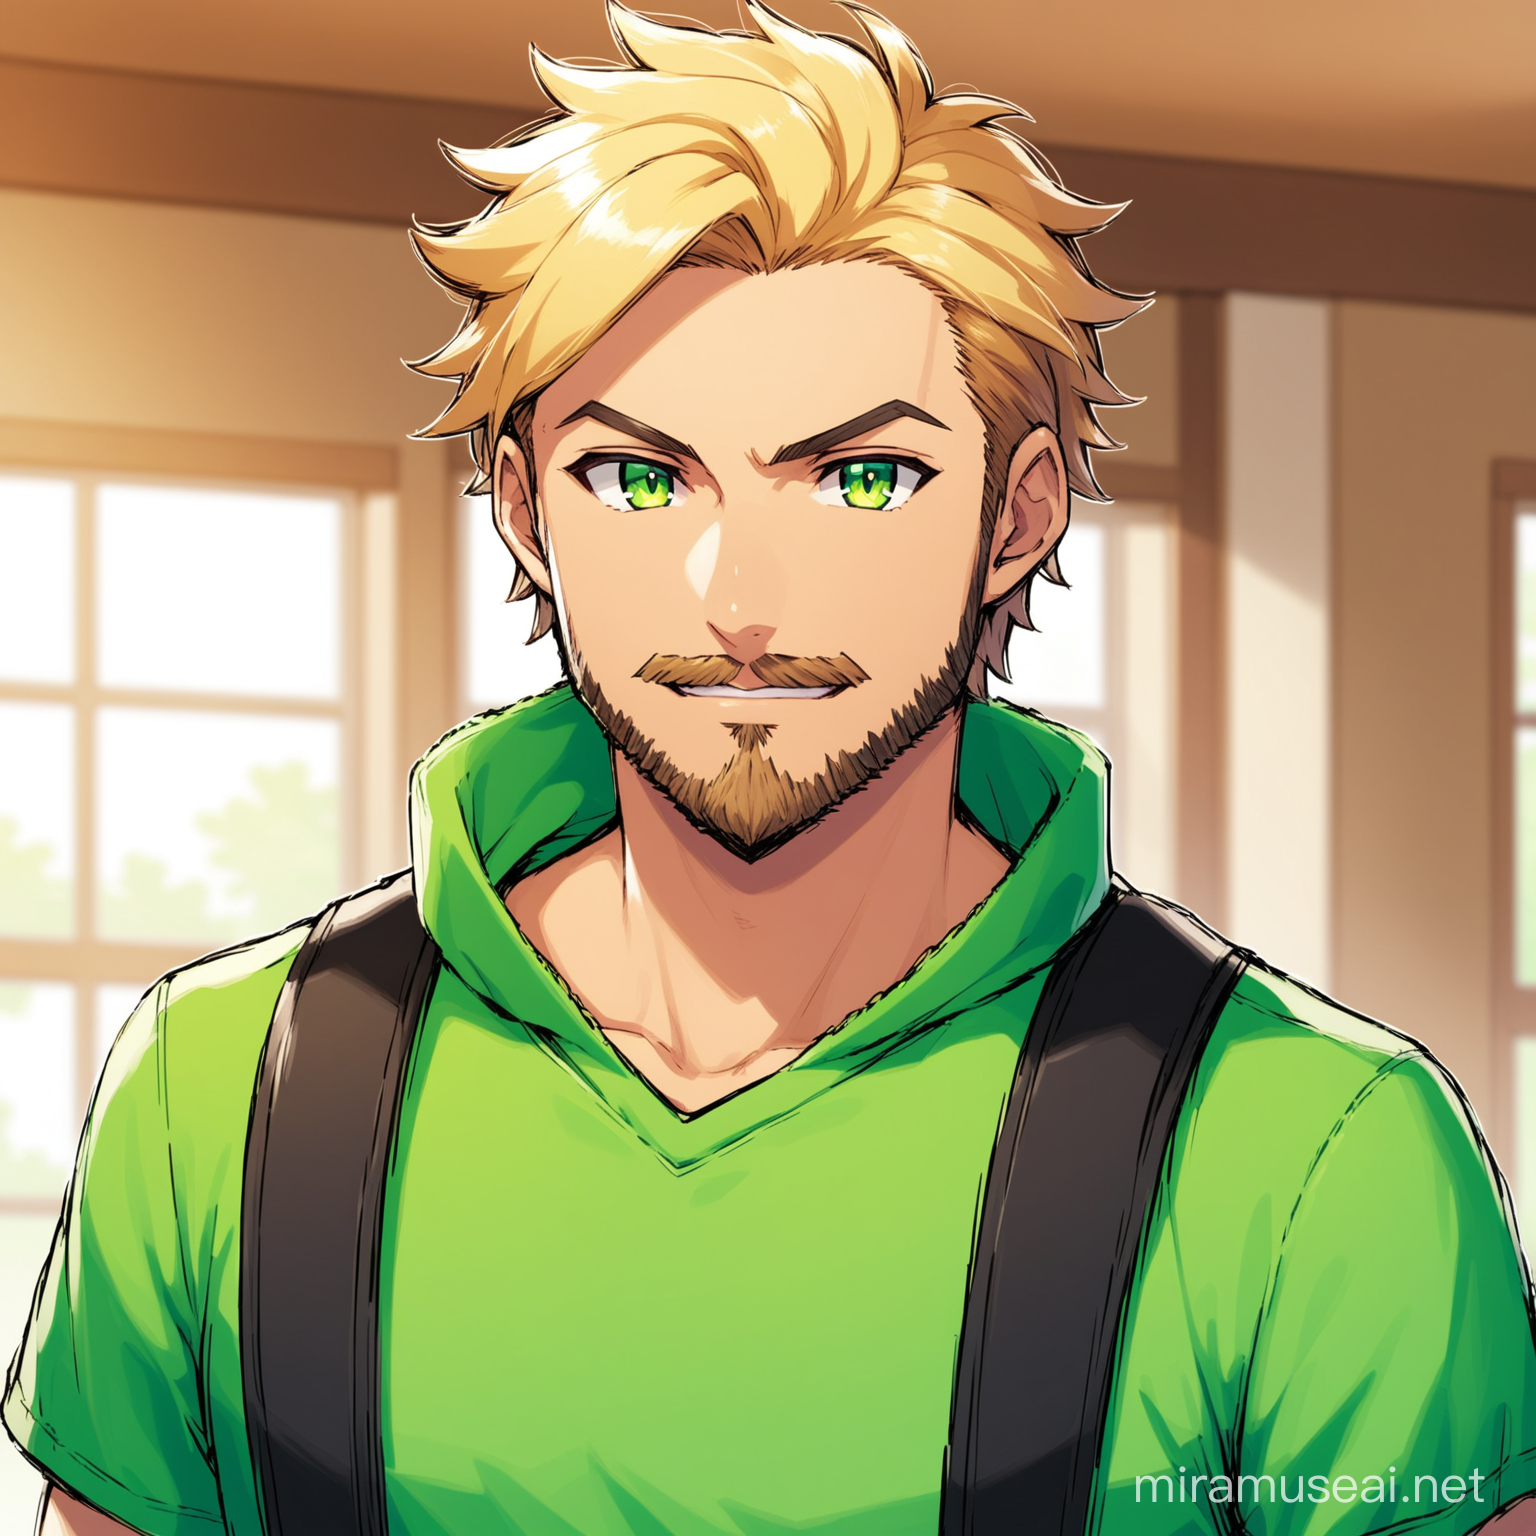 A blonde Pokémon trainer with green eyes and a stubble beard